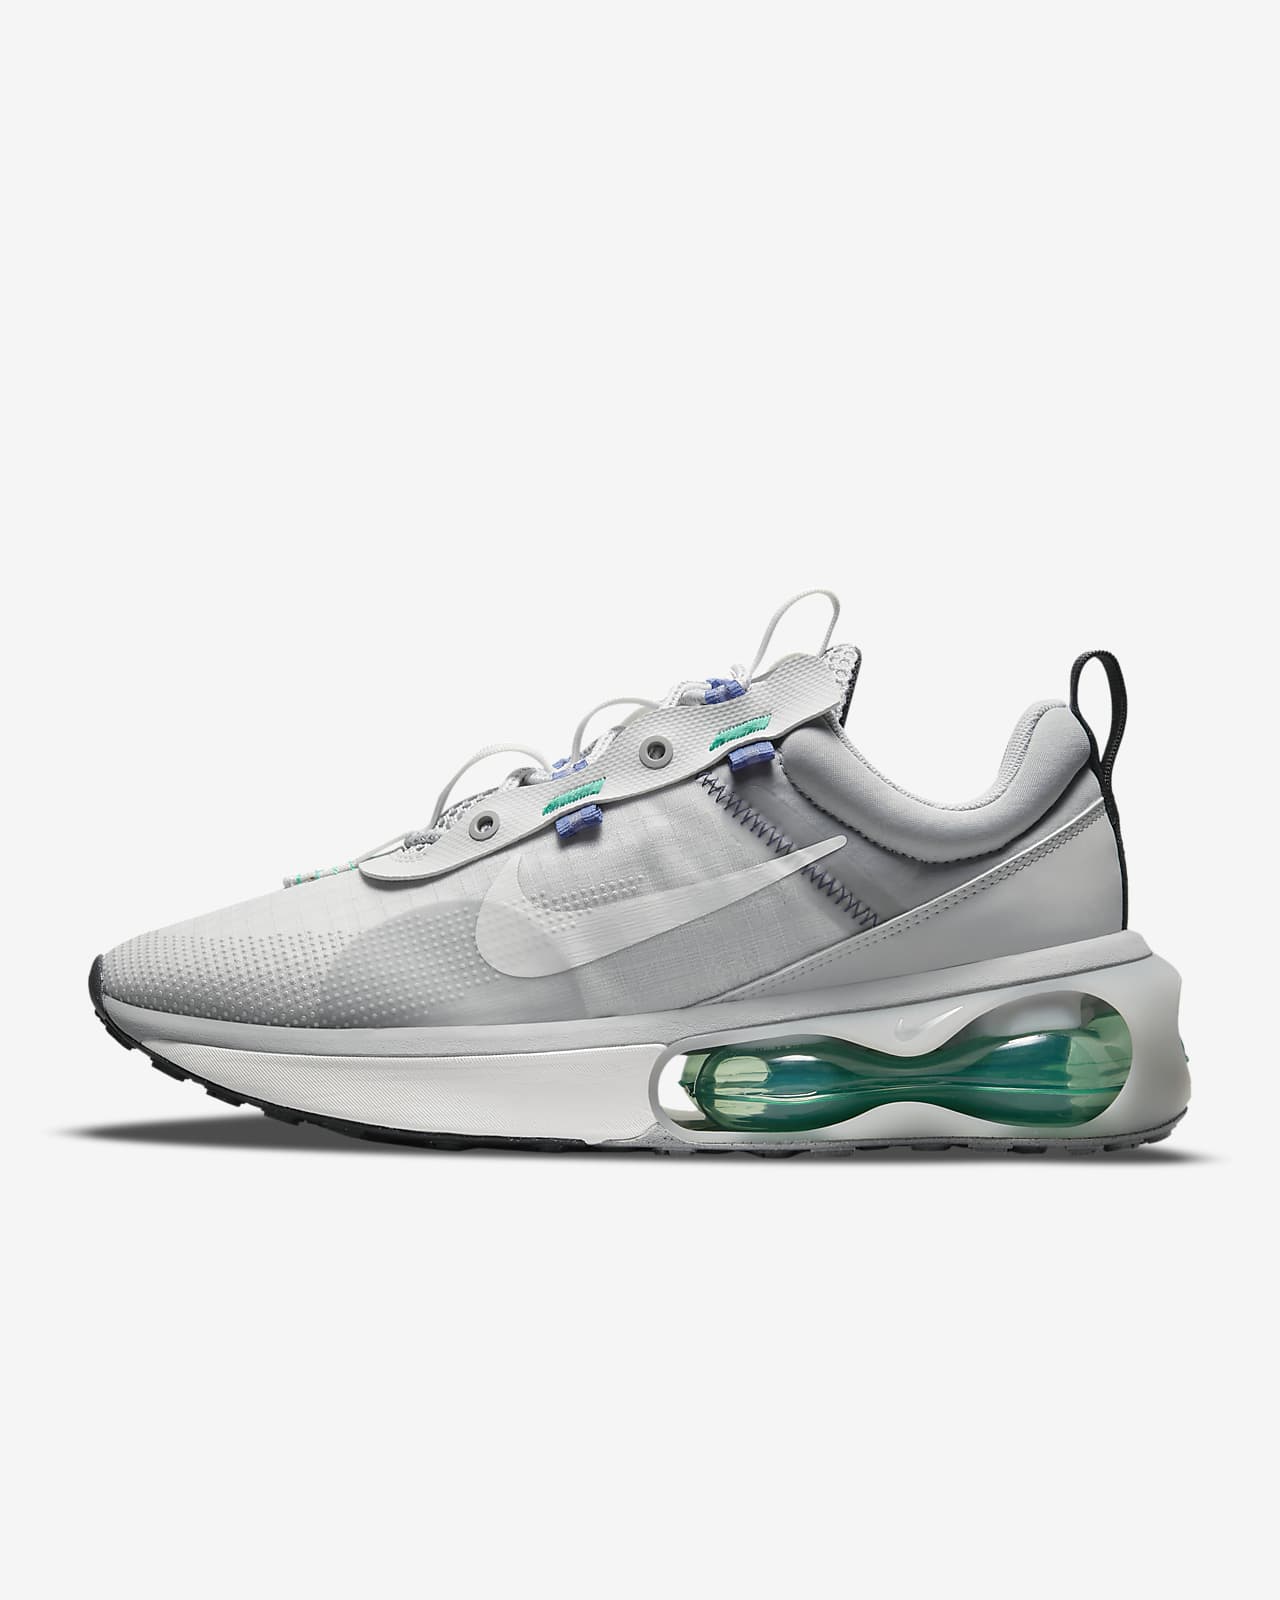 images of air max shoes